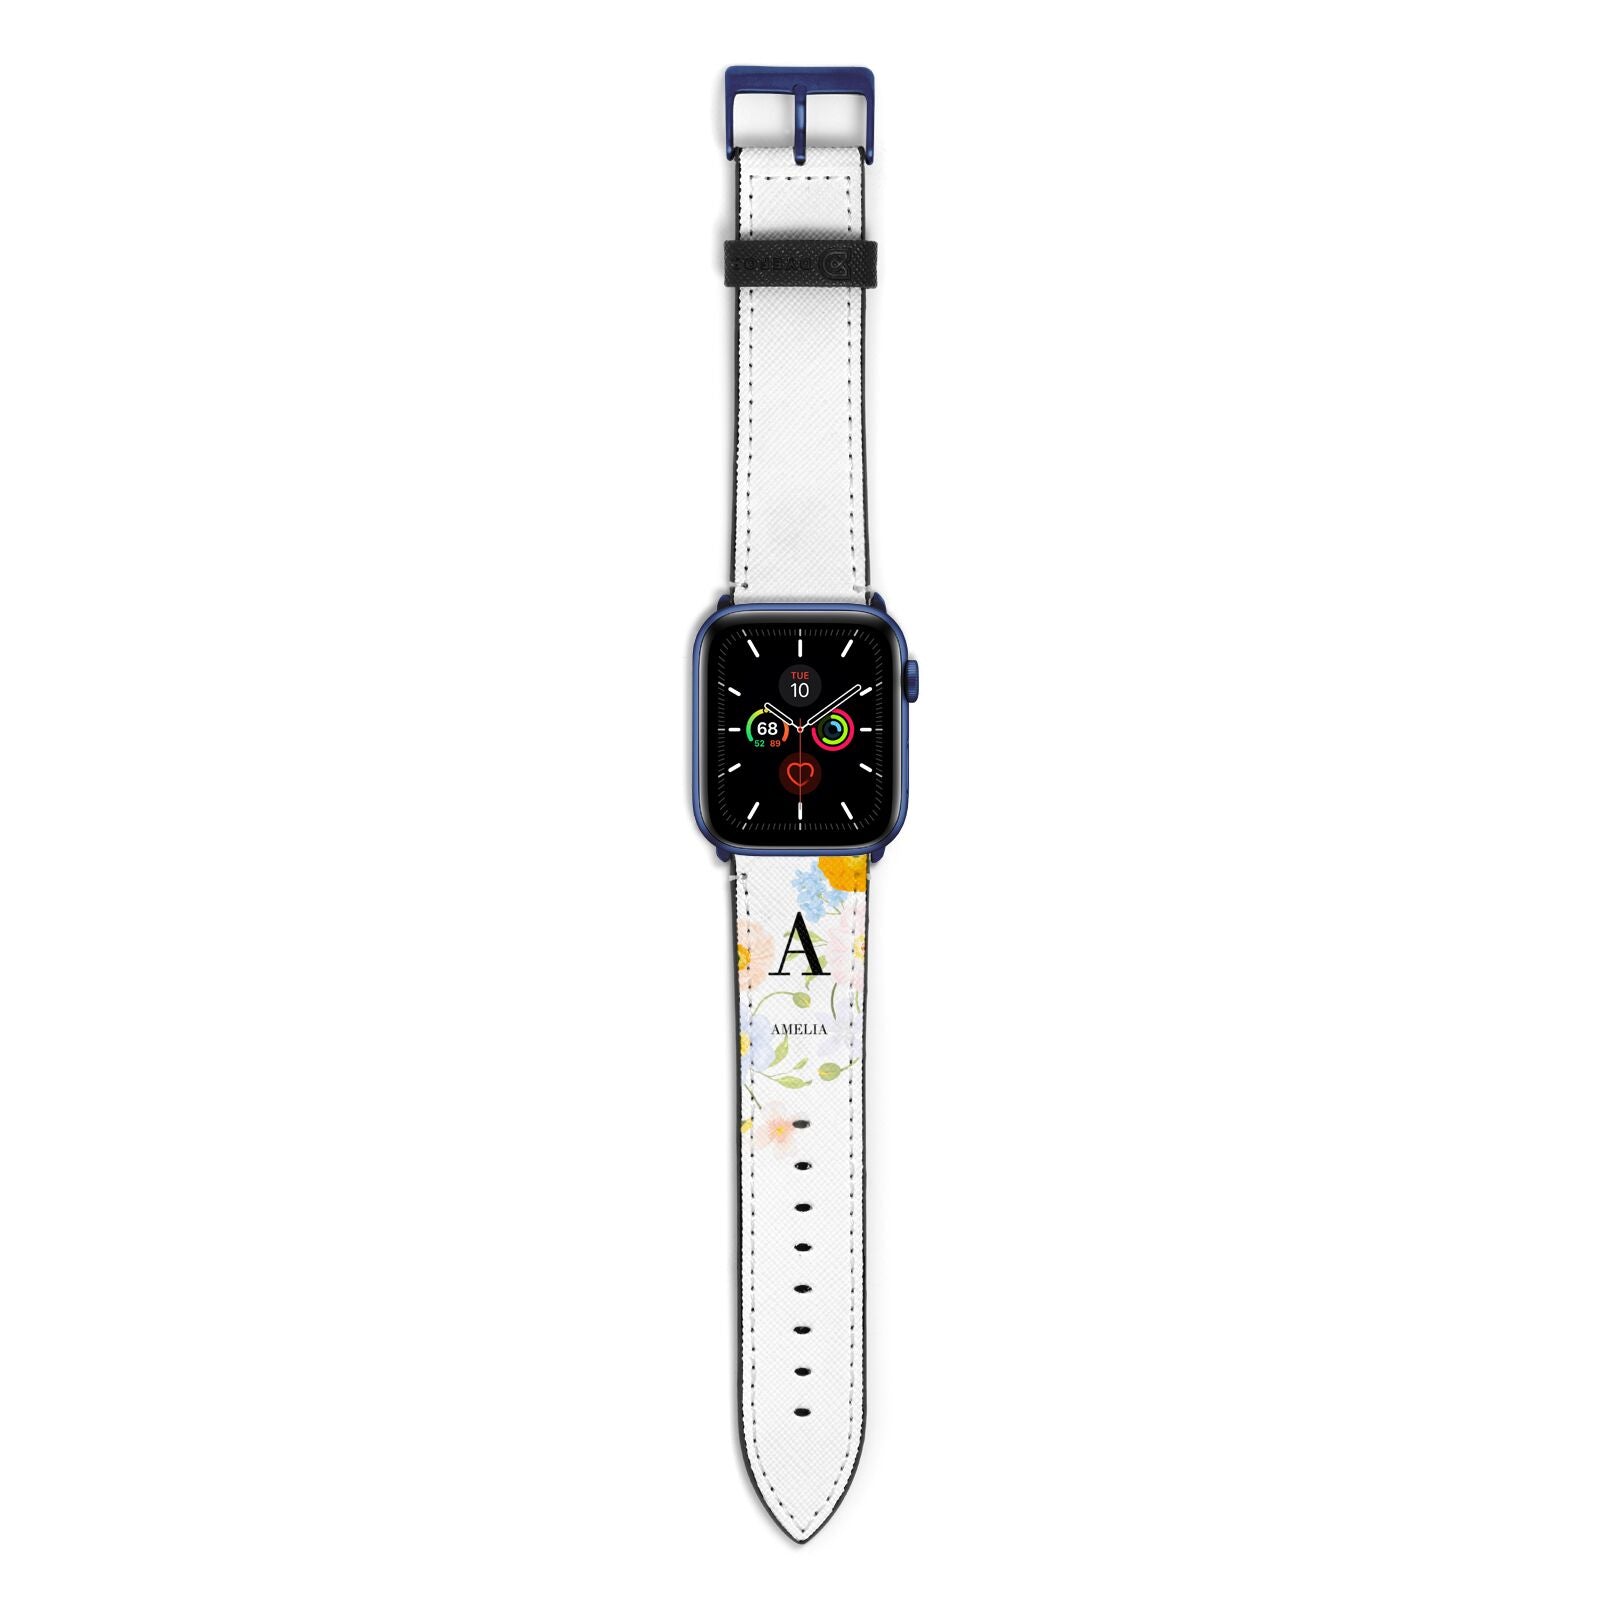 Customised Floral Apple Watch Strap with Blue Hardware